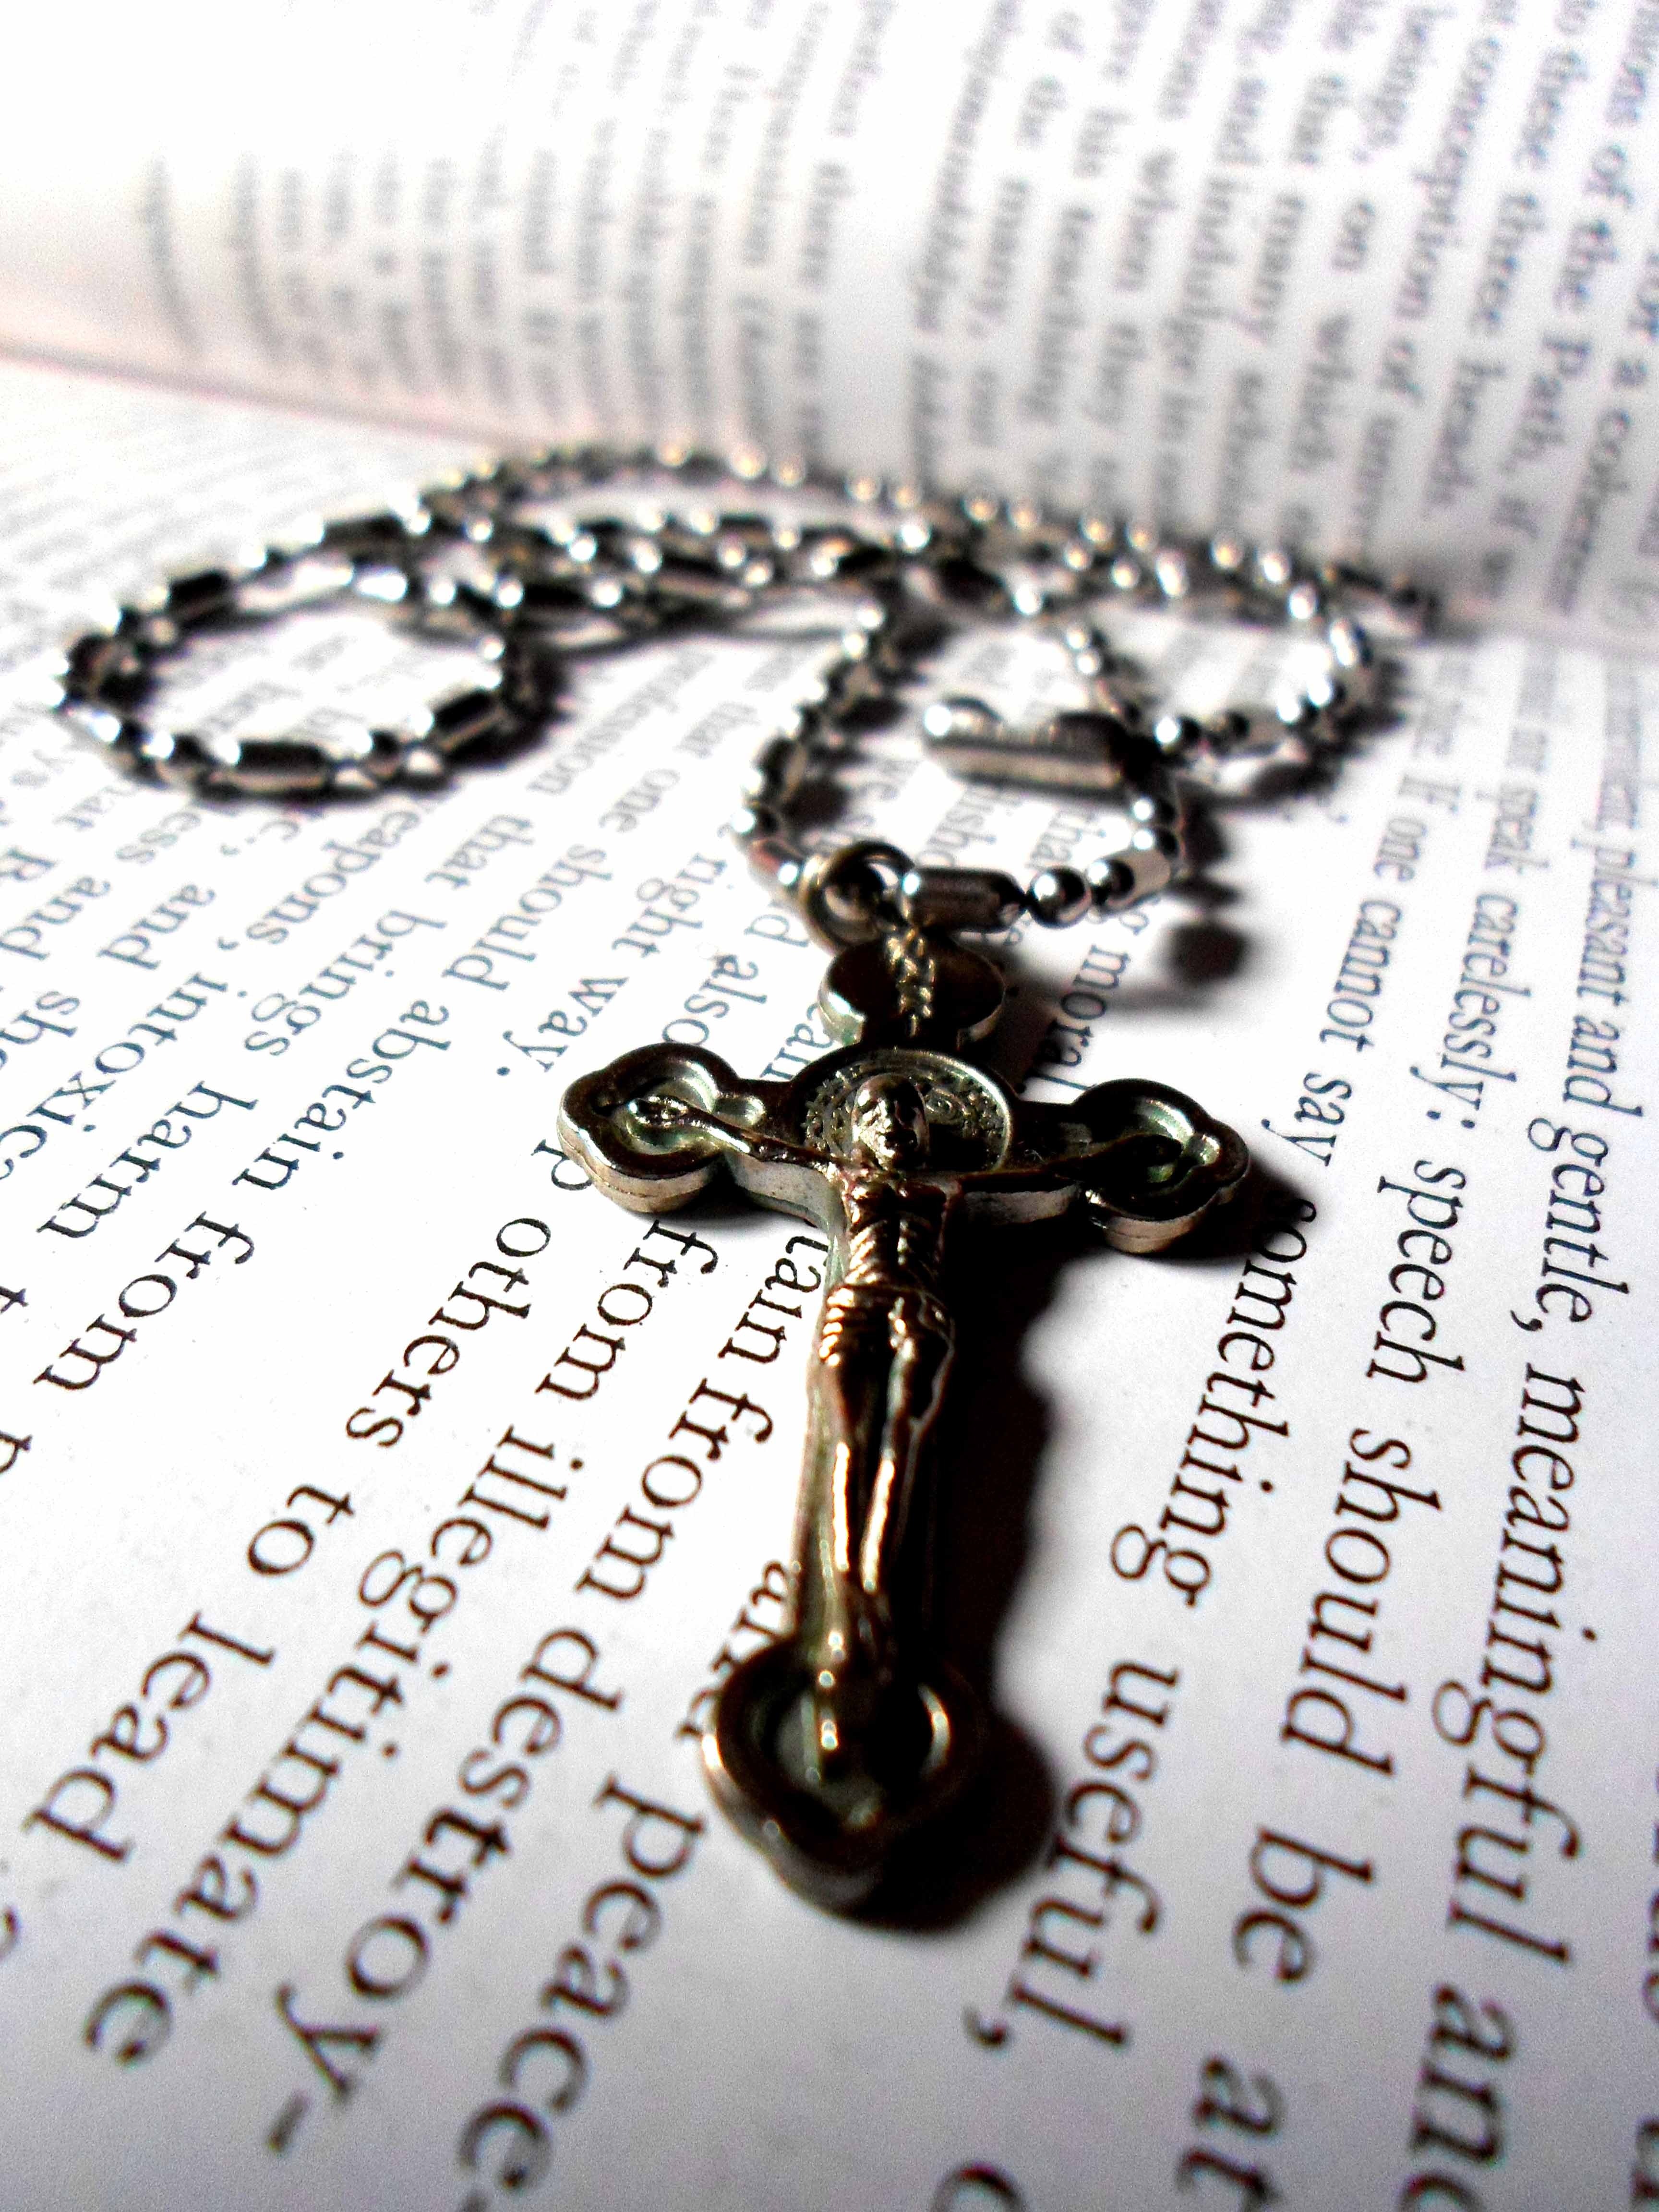 silver crucifix pendant necklace on book